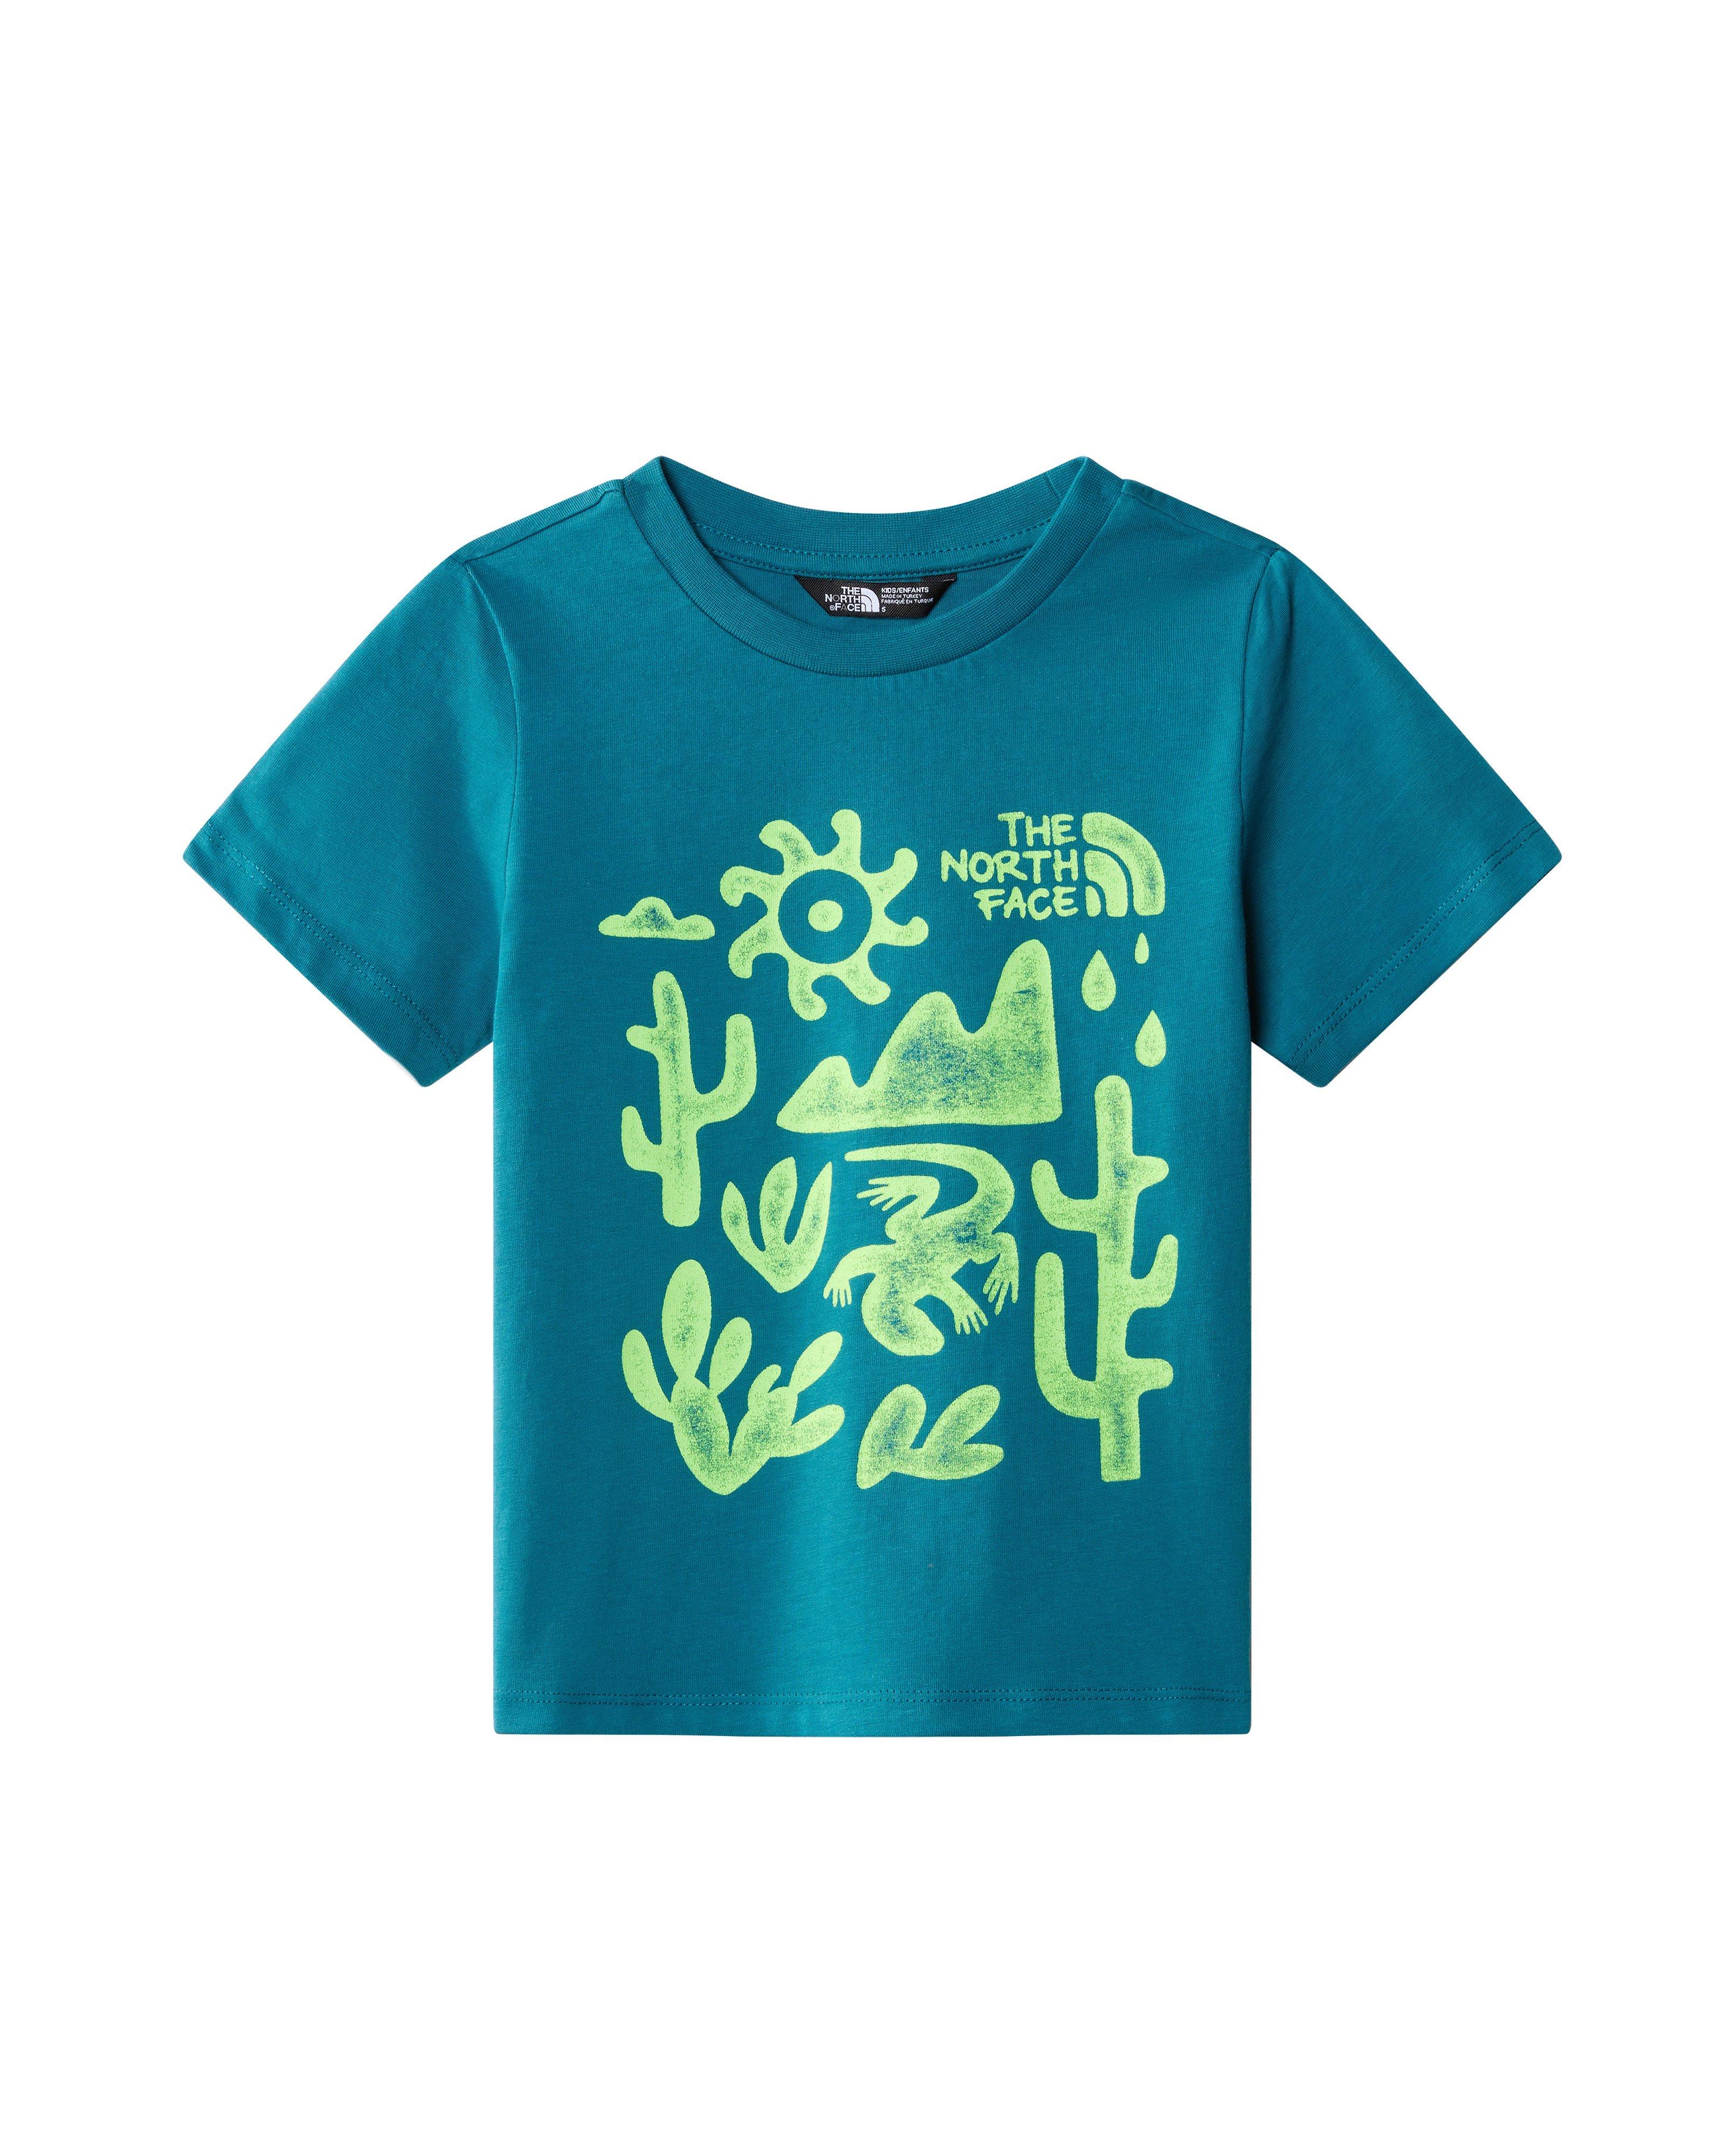 The North Face Kids Outdoor Graphic T-shirt -  Blue